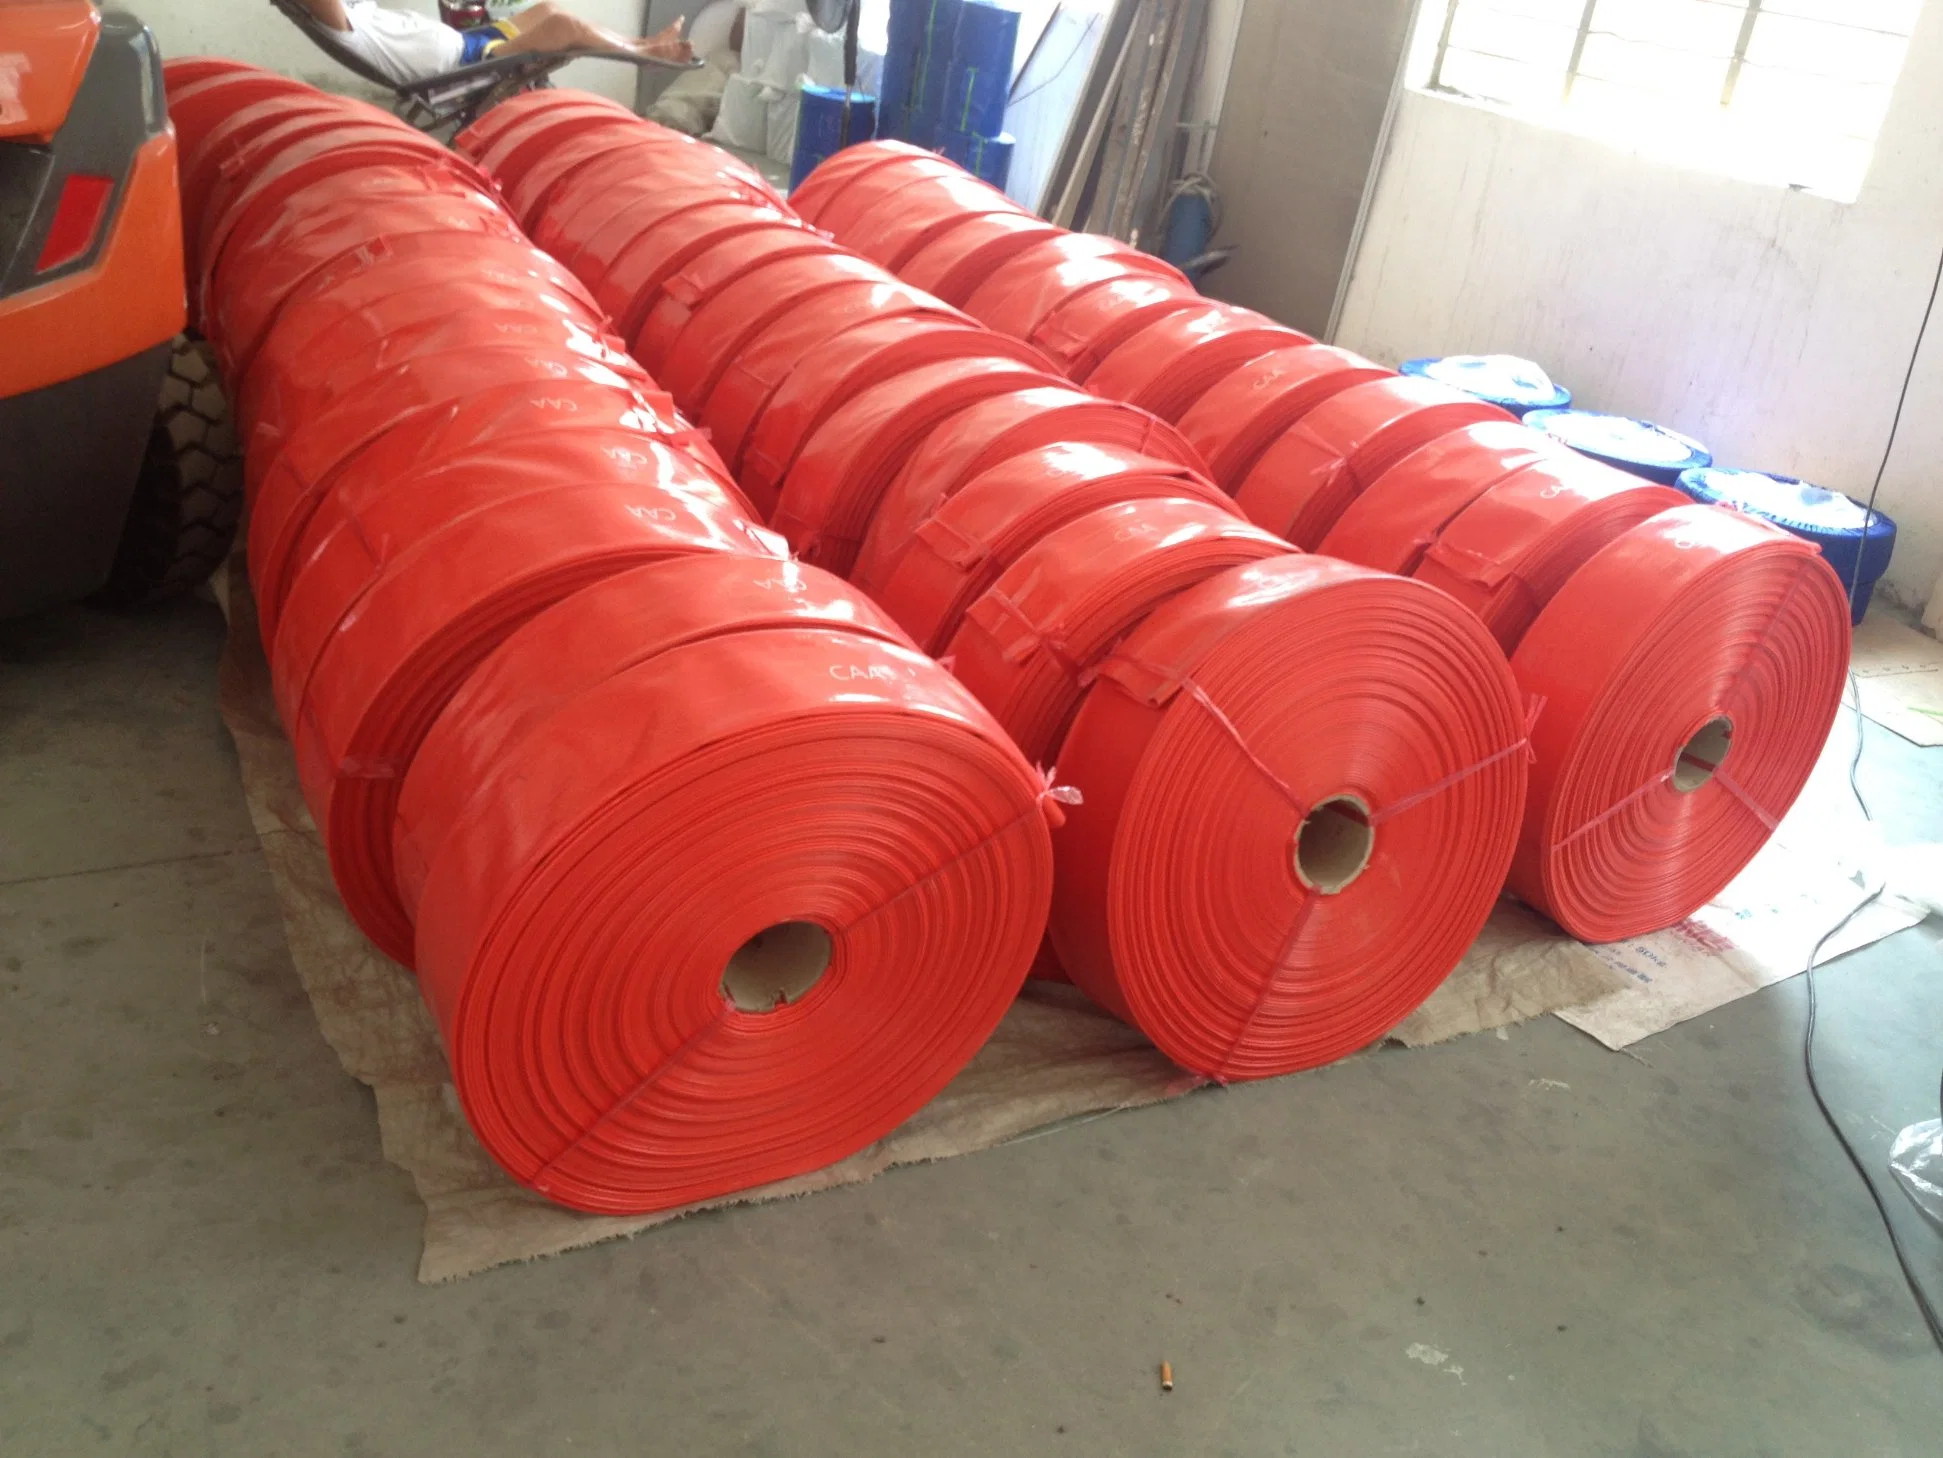 Smooth Surface PVC Lay Flexible Hose Garden Hose Irrigation Water Pipe Water Garden Hose Pipes